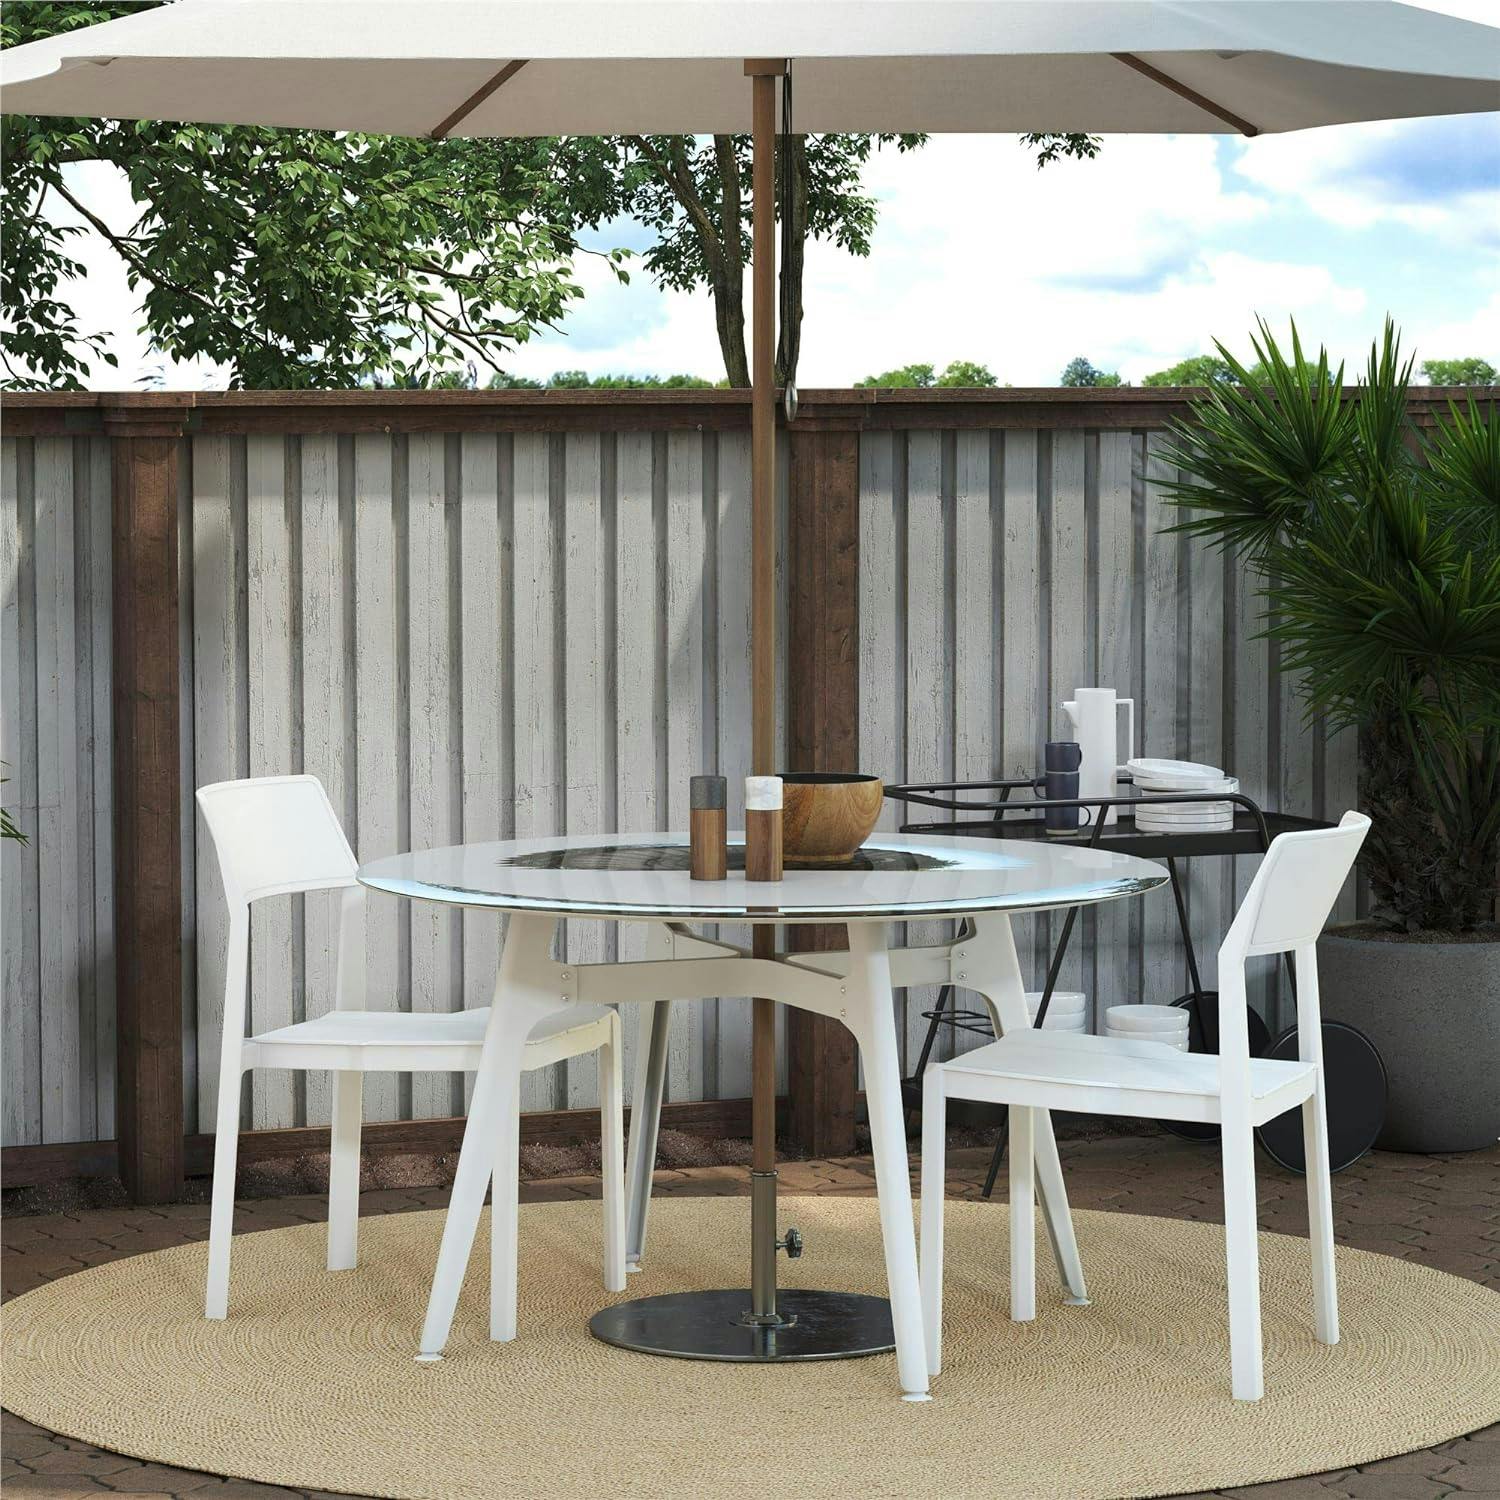 Chandler Modern White Patio Dining Chairs, Indoor/Outdoor, Set of 2